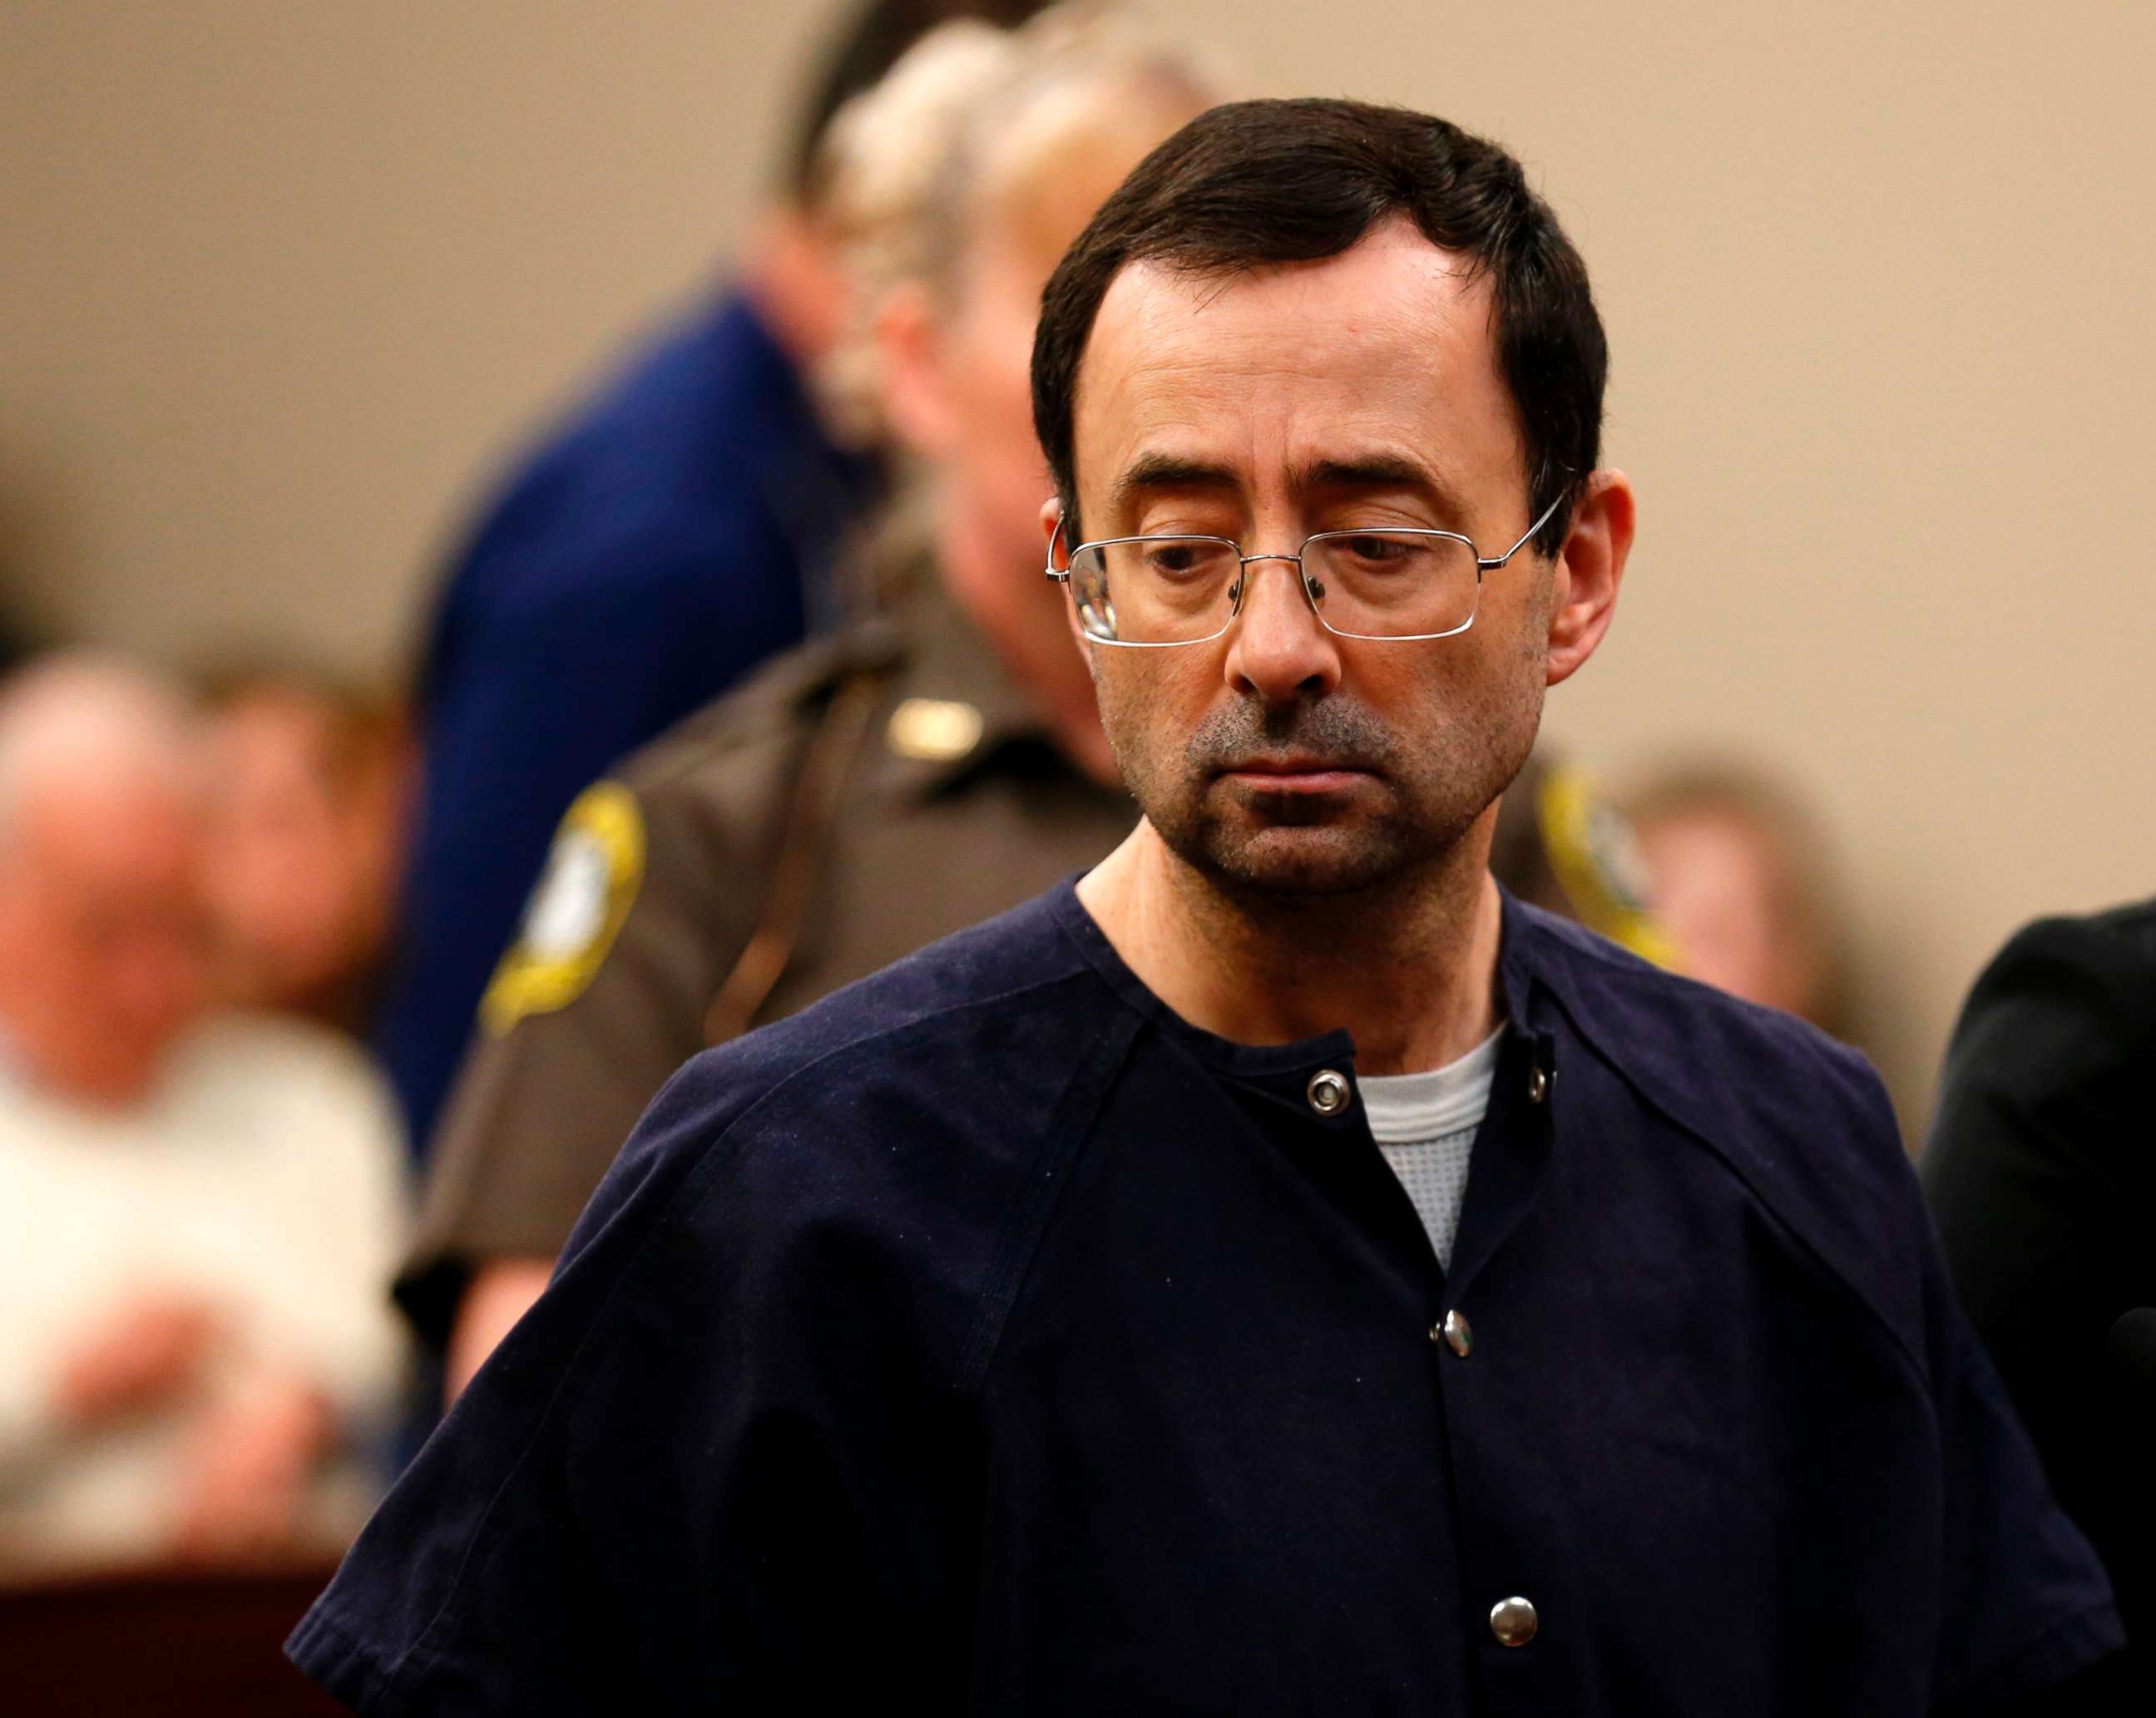 PHOTO: Former Michigan State University and USA Gymnastics doctor Larry Nassar addresses the court during the sentencing phase in Ingham County Circuit Court on Jan. 24, 2018, in Lansing, Mich.